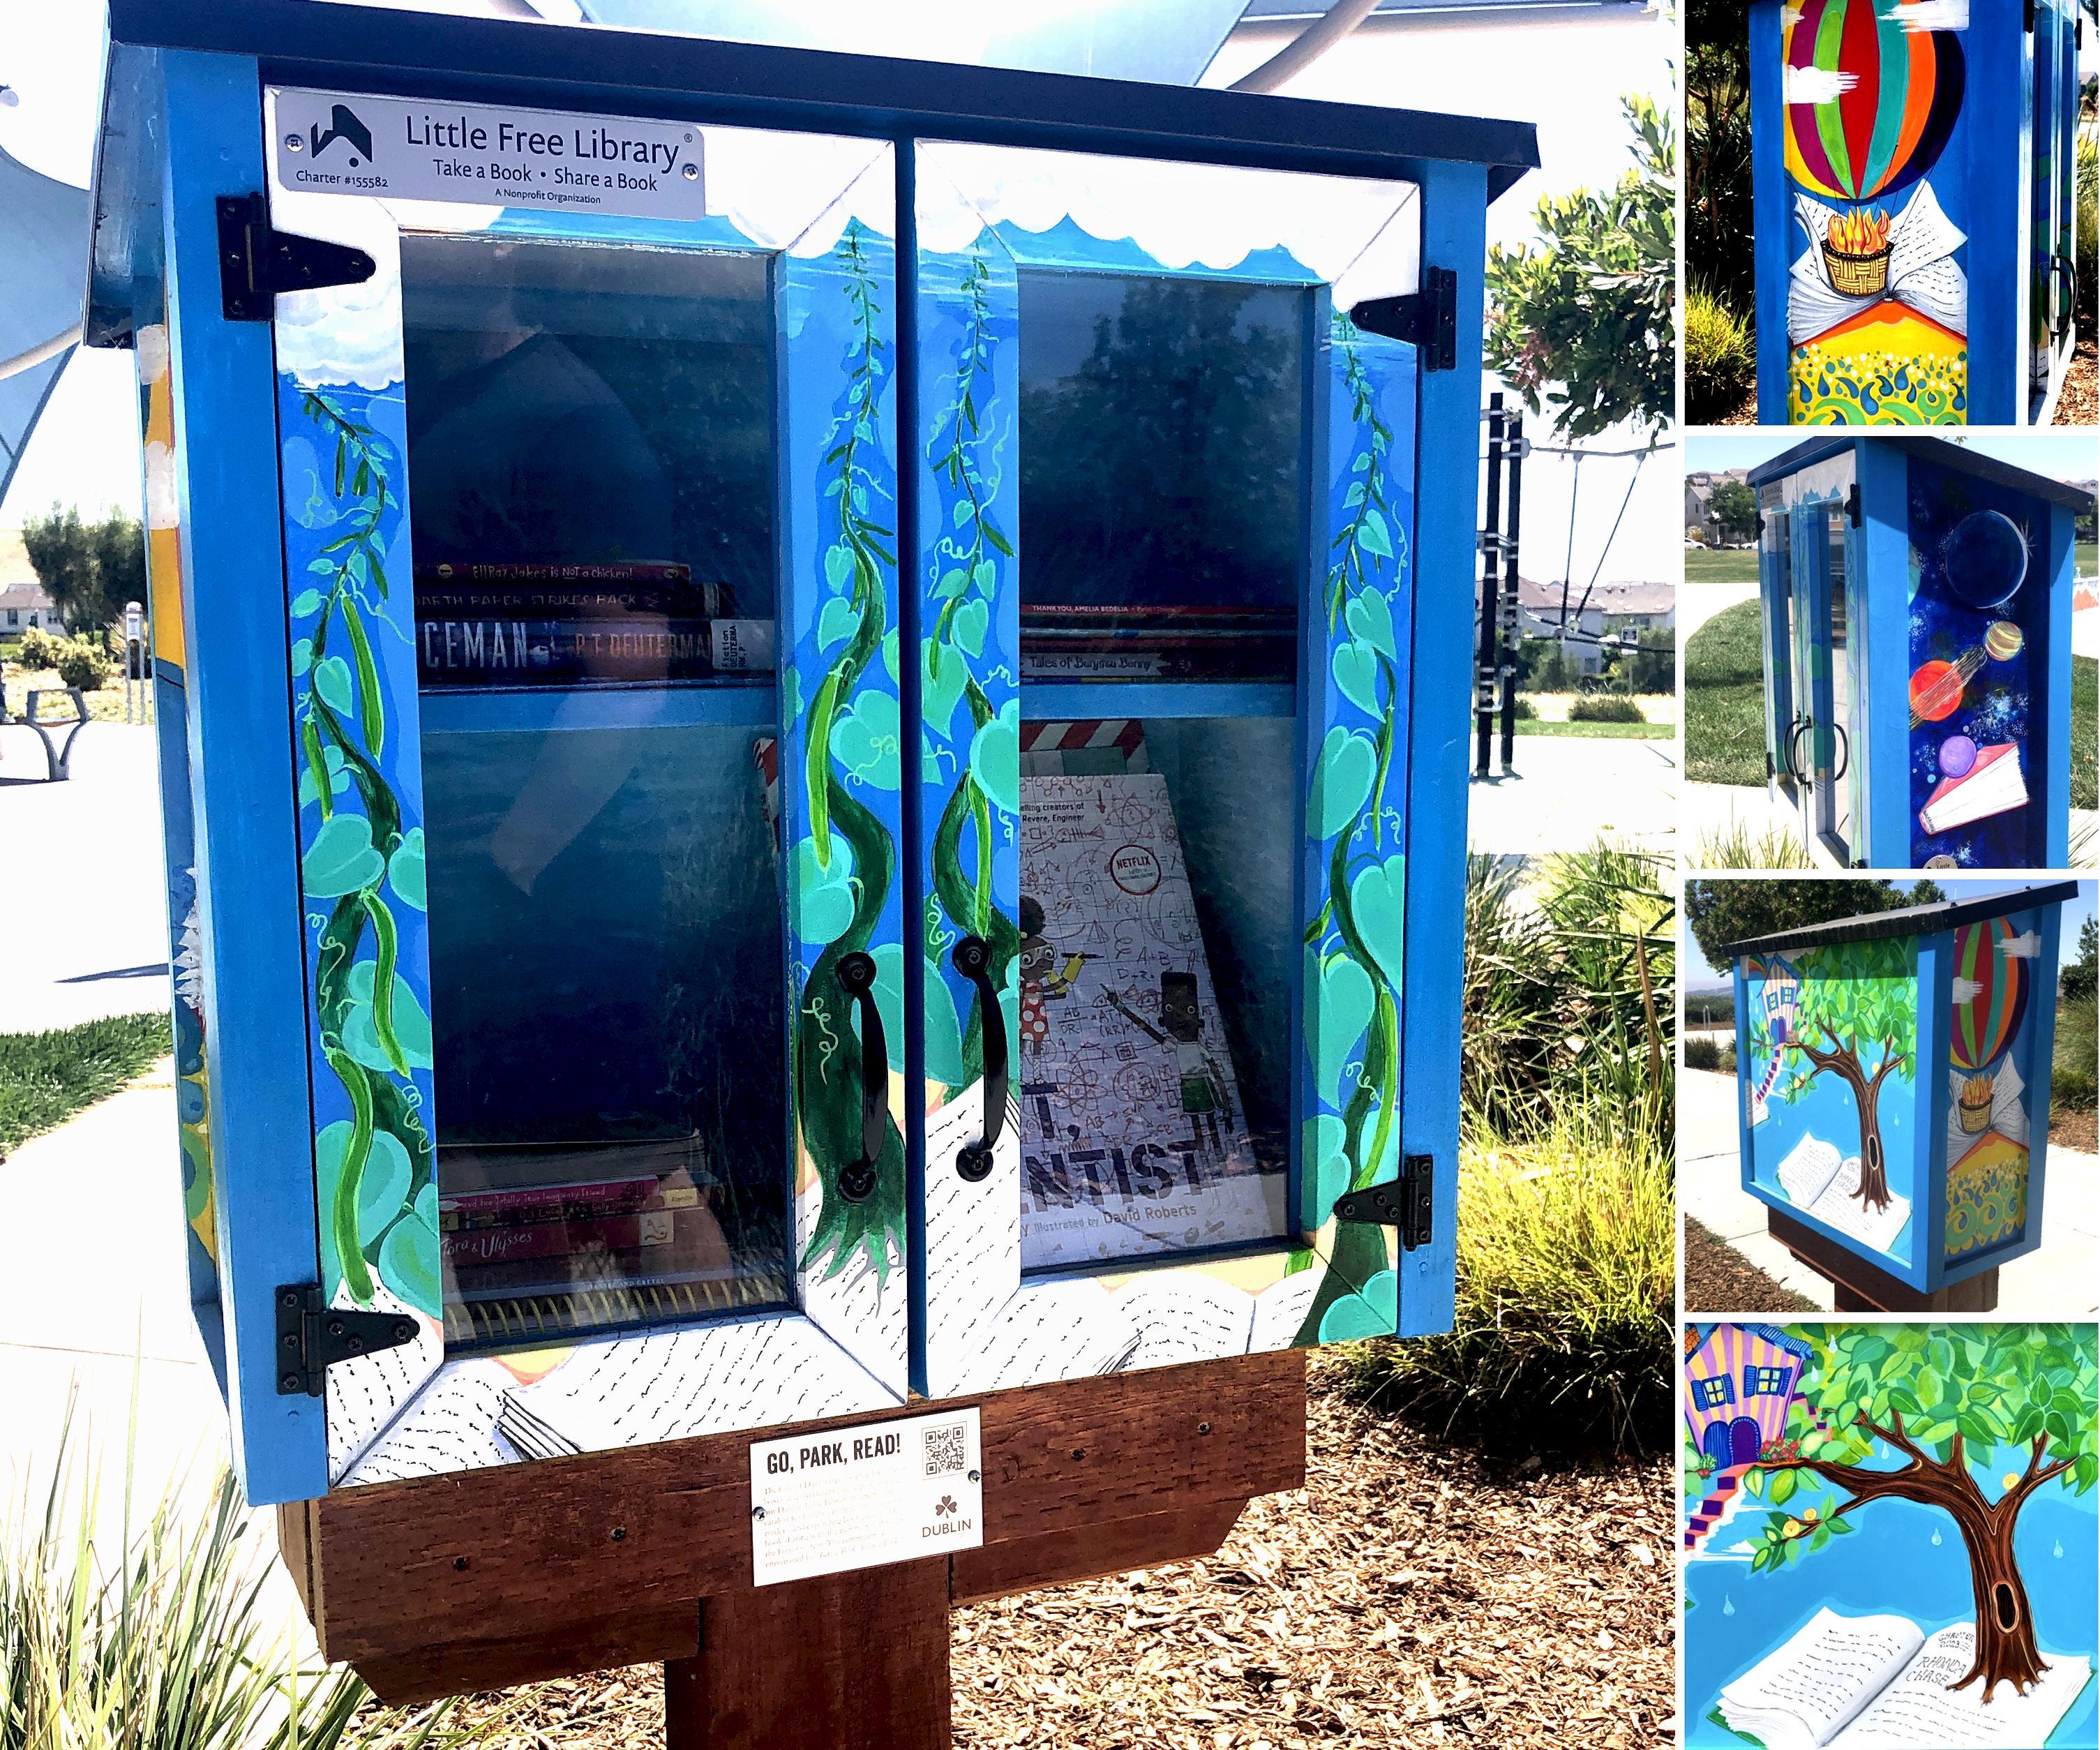 Books Come to Life! Little Free Library